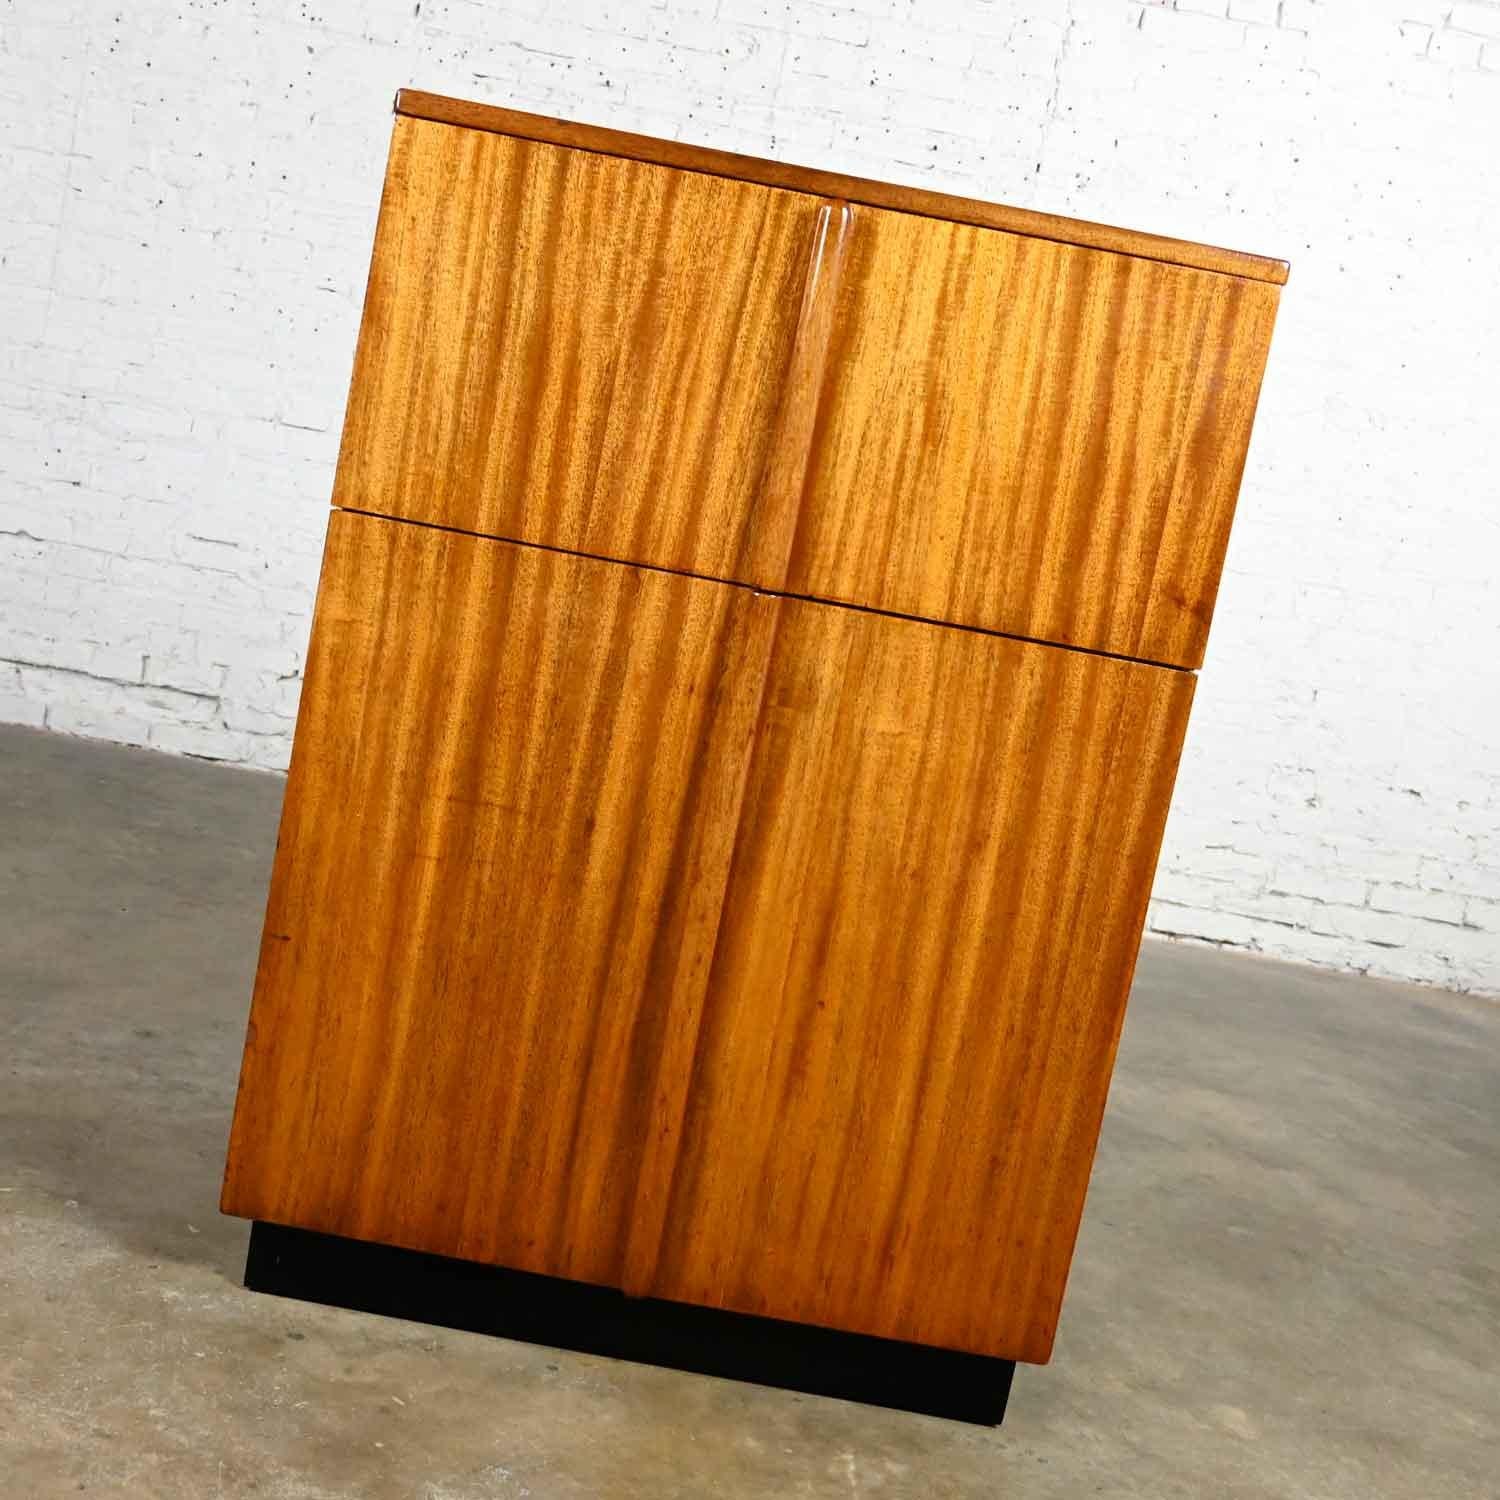 Awesome vintage Art Deco dry bar or liquor cabinet comprised of Philippine mahogany. Beautiful condition, keeping in mind that this is vintage and not new so will have signs of use and wear. We have added a new black painted base. There were several